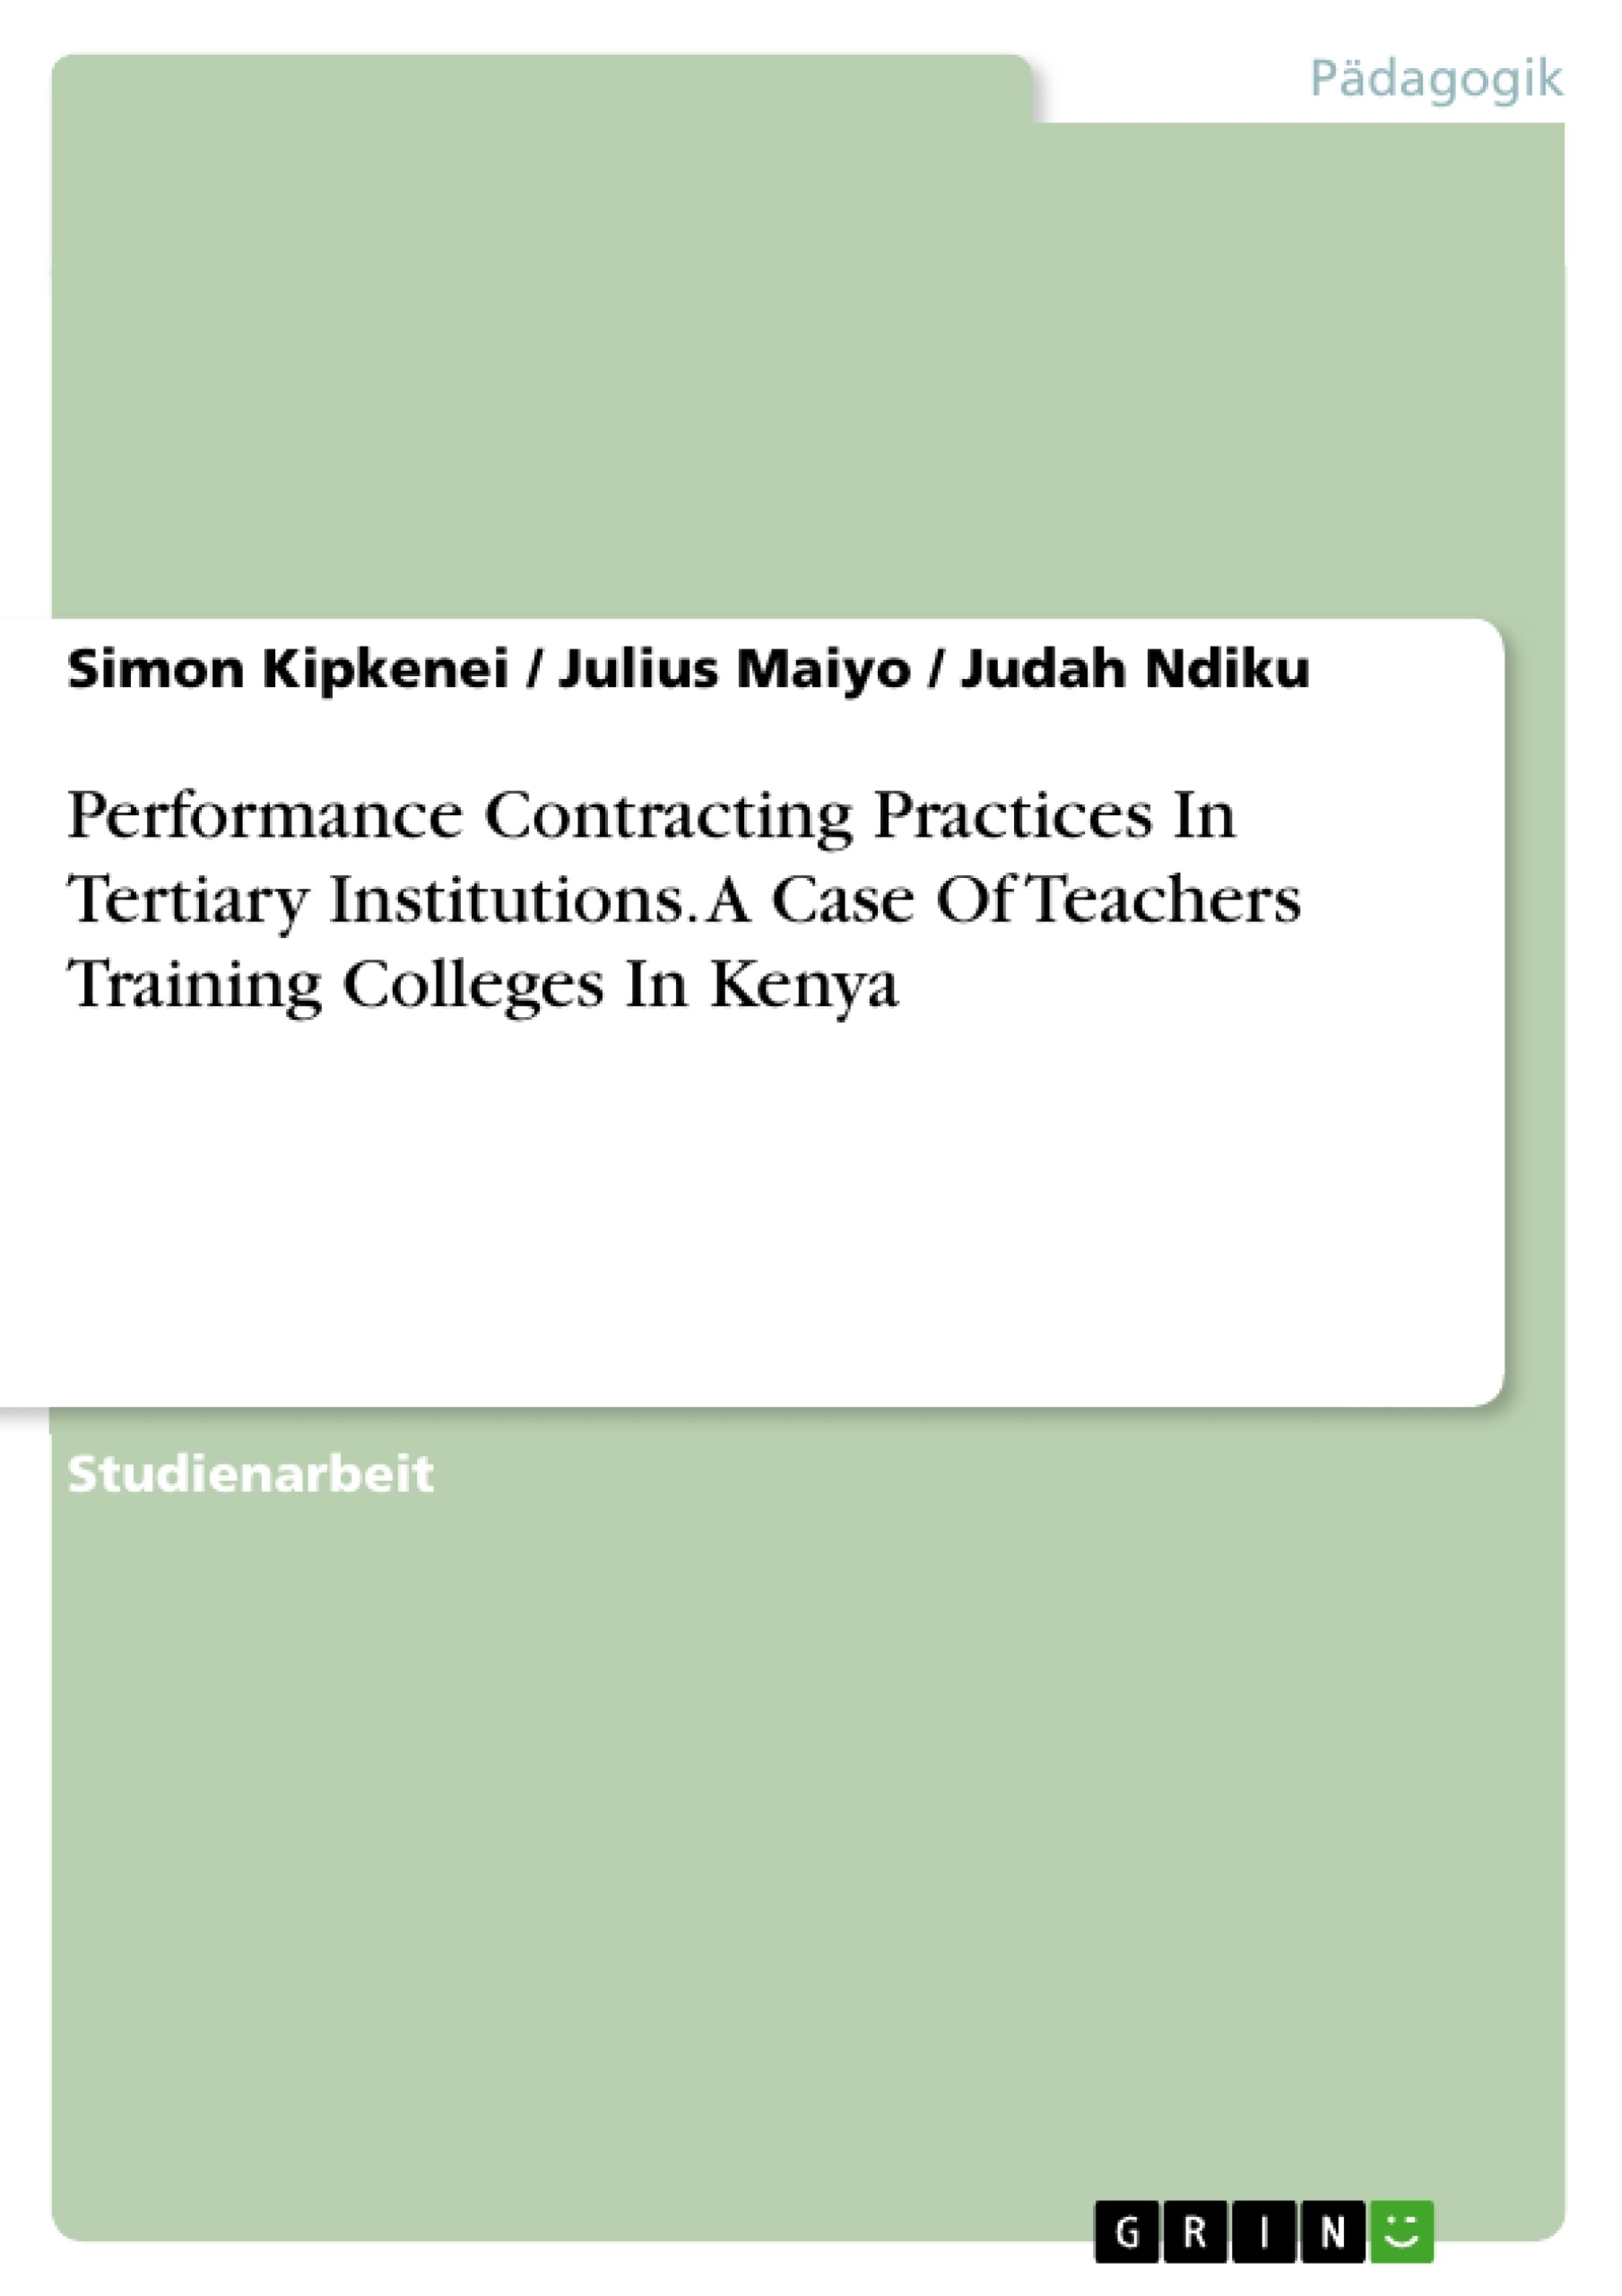 Titel: Performance Contracting Practices In Tertiary Institutions. A Case Of Teachers Training Colleges In Kenya